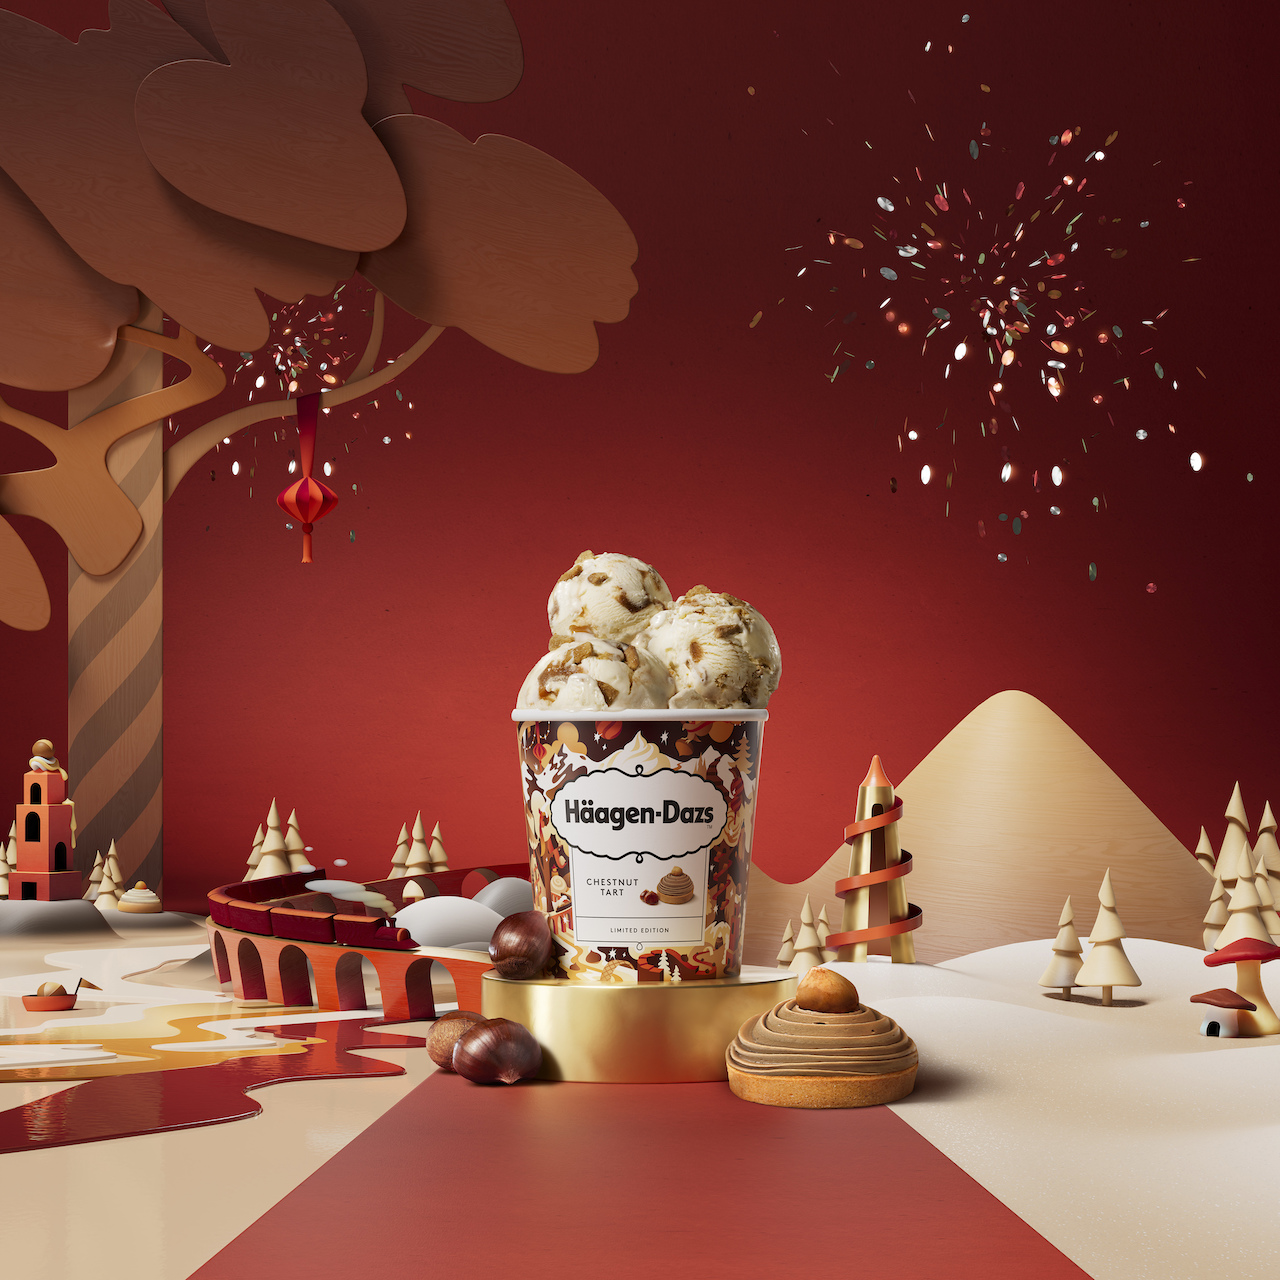 5 New Ice Creams To Indulge In This Holiday, 5 New Ice Creams To Savour In Singapore This Holiday Season 2023